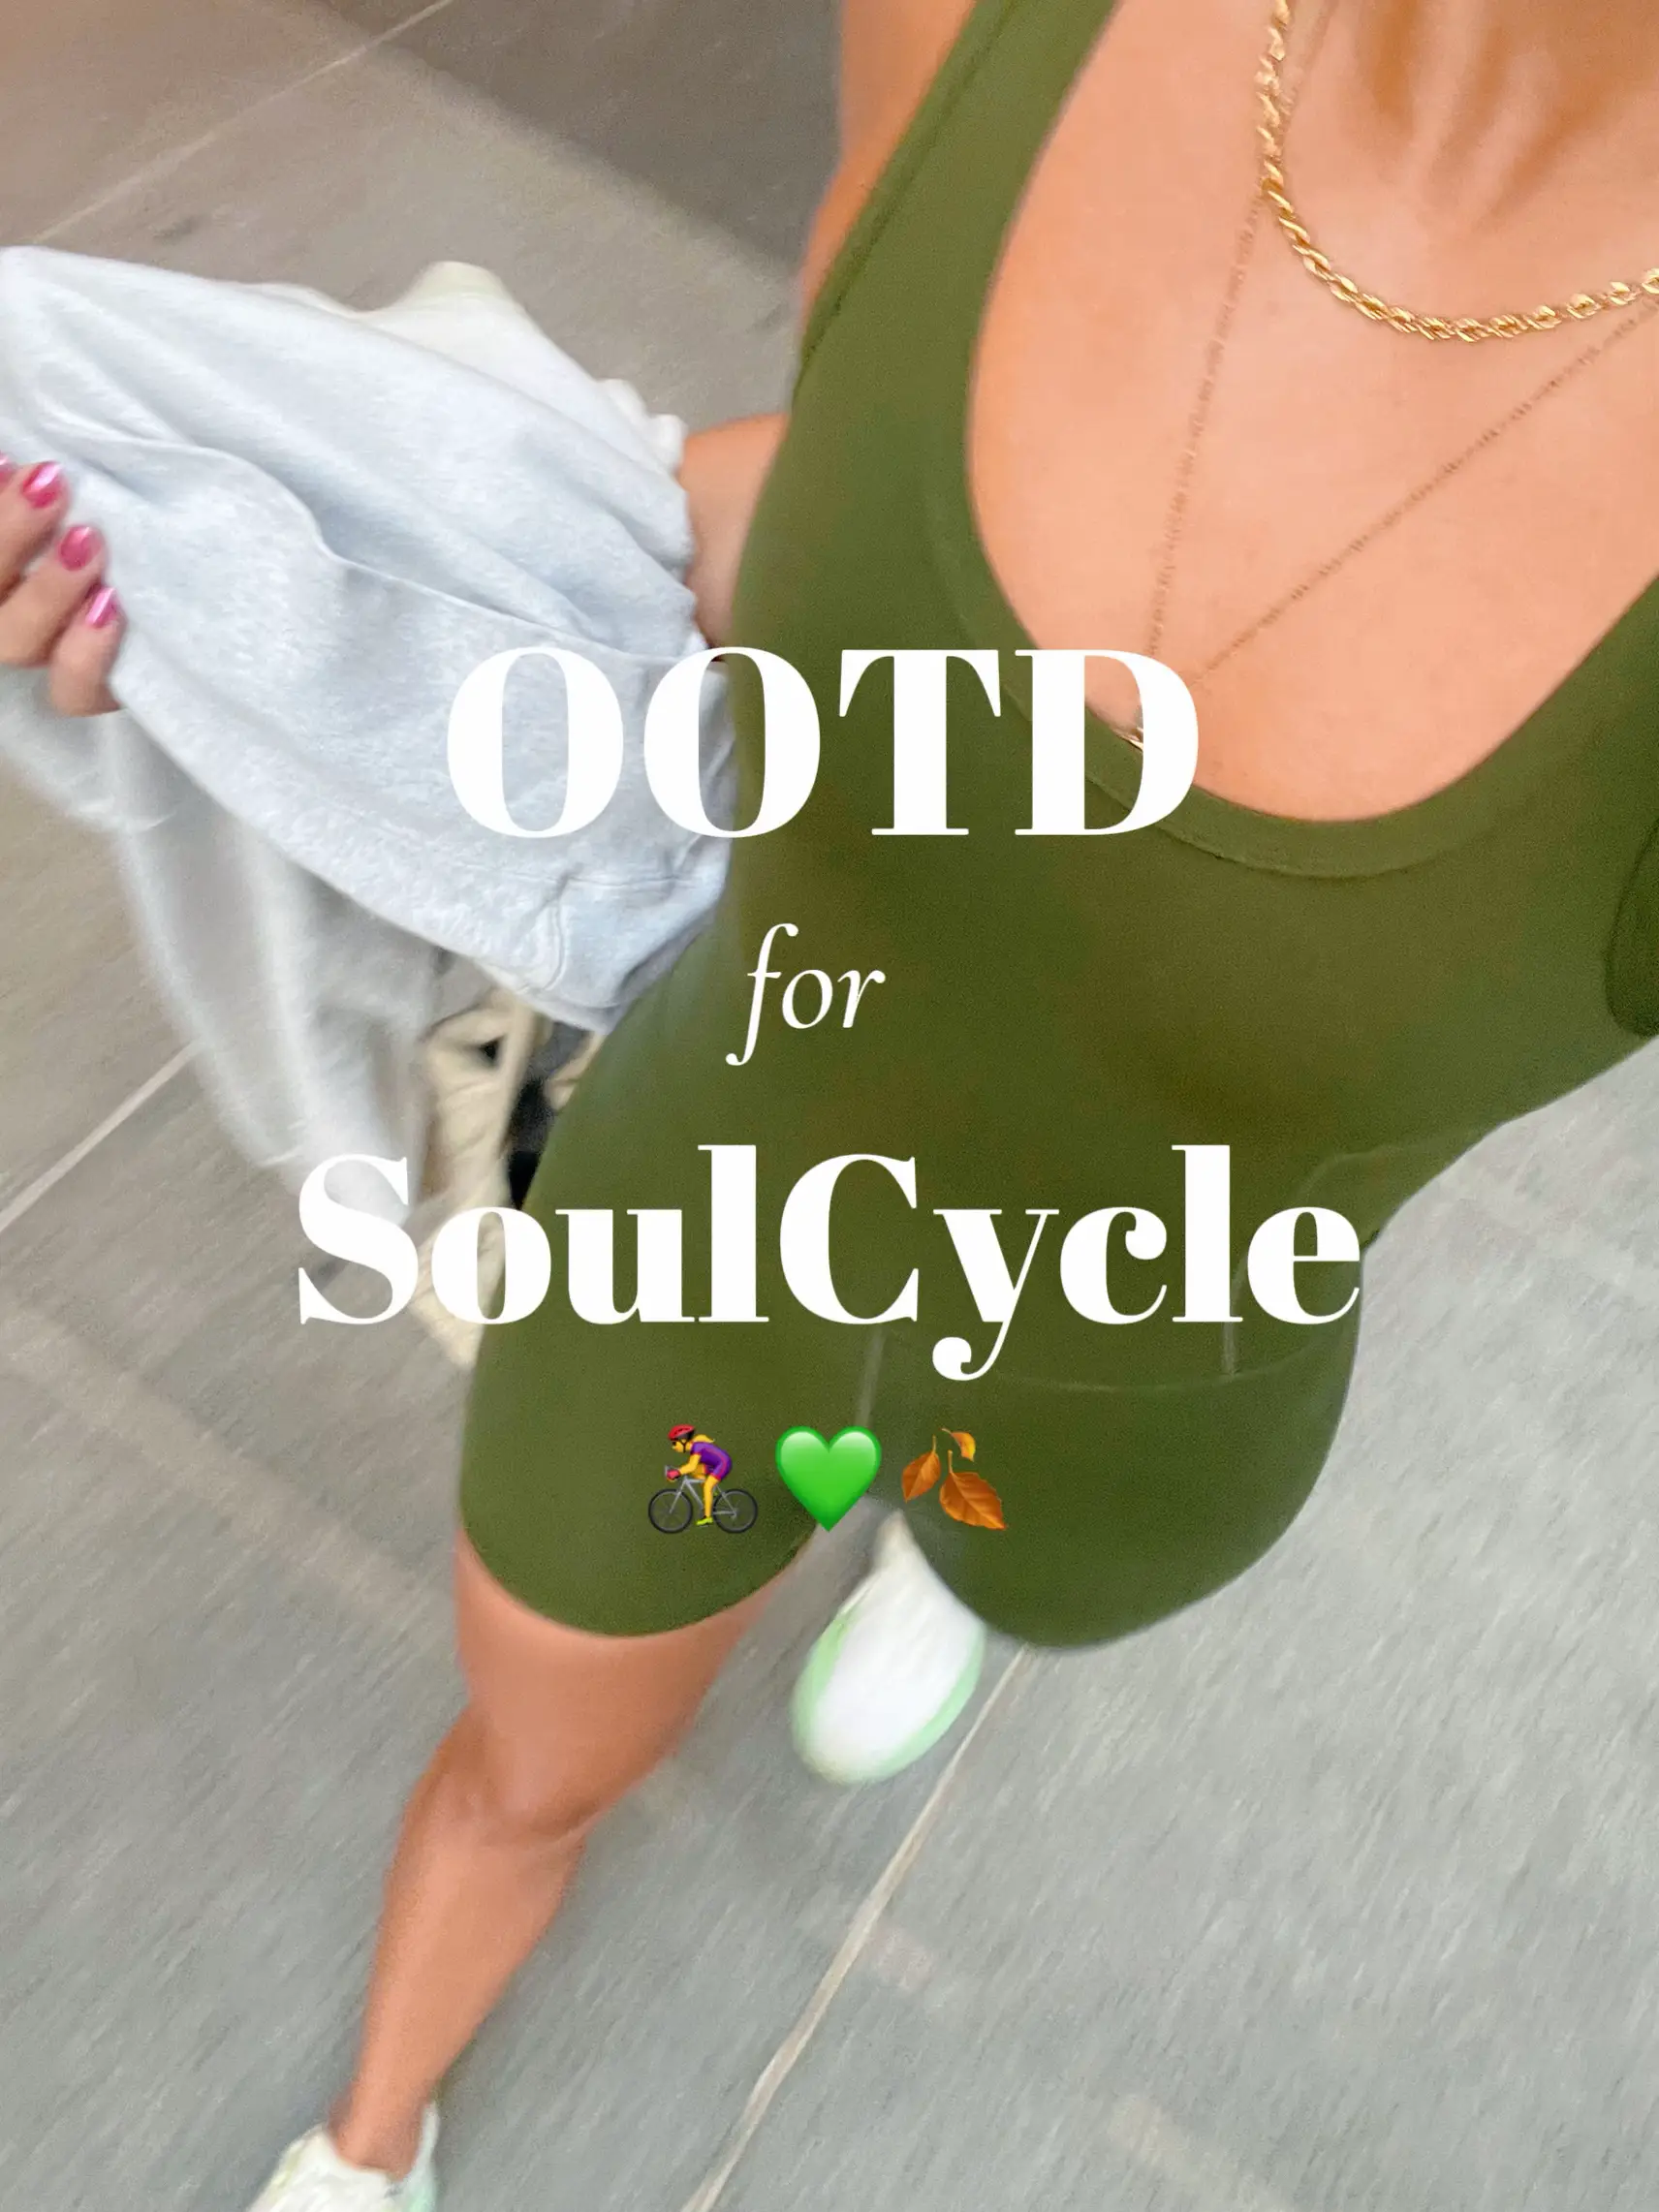 OOTD for SoulCycle 🤍🚴‍♀️, Gallery posted by Luisa Nunez